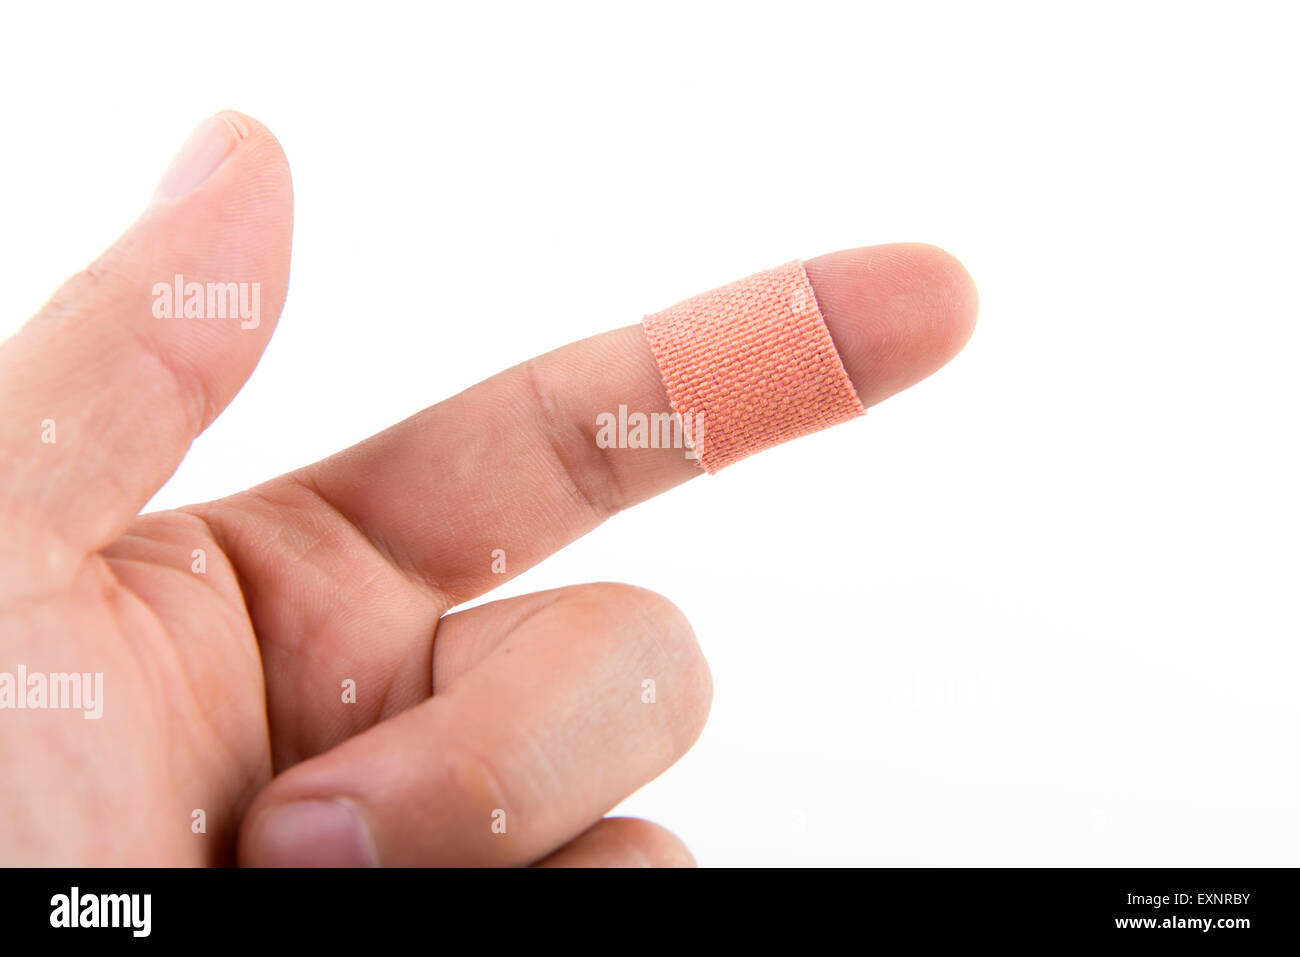 https://c8.alamy.com/comp/EXNRBY/adhesive-bandage-on-the-injury-finger-EXNRBY.jpg